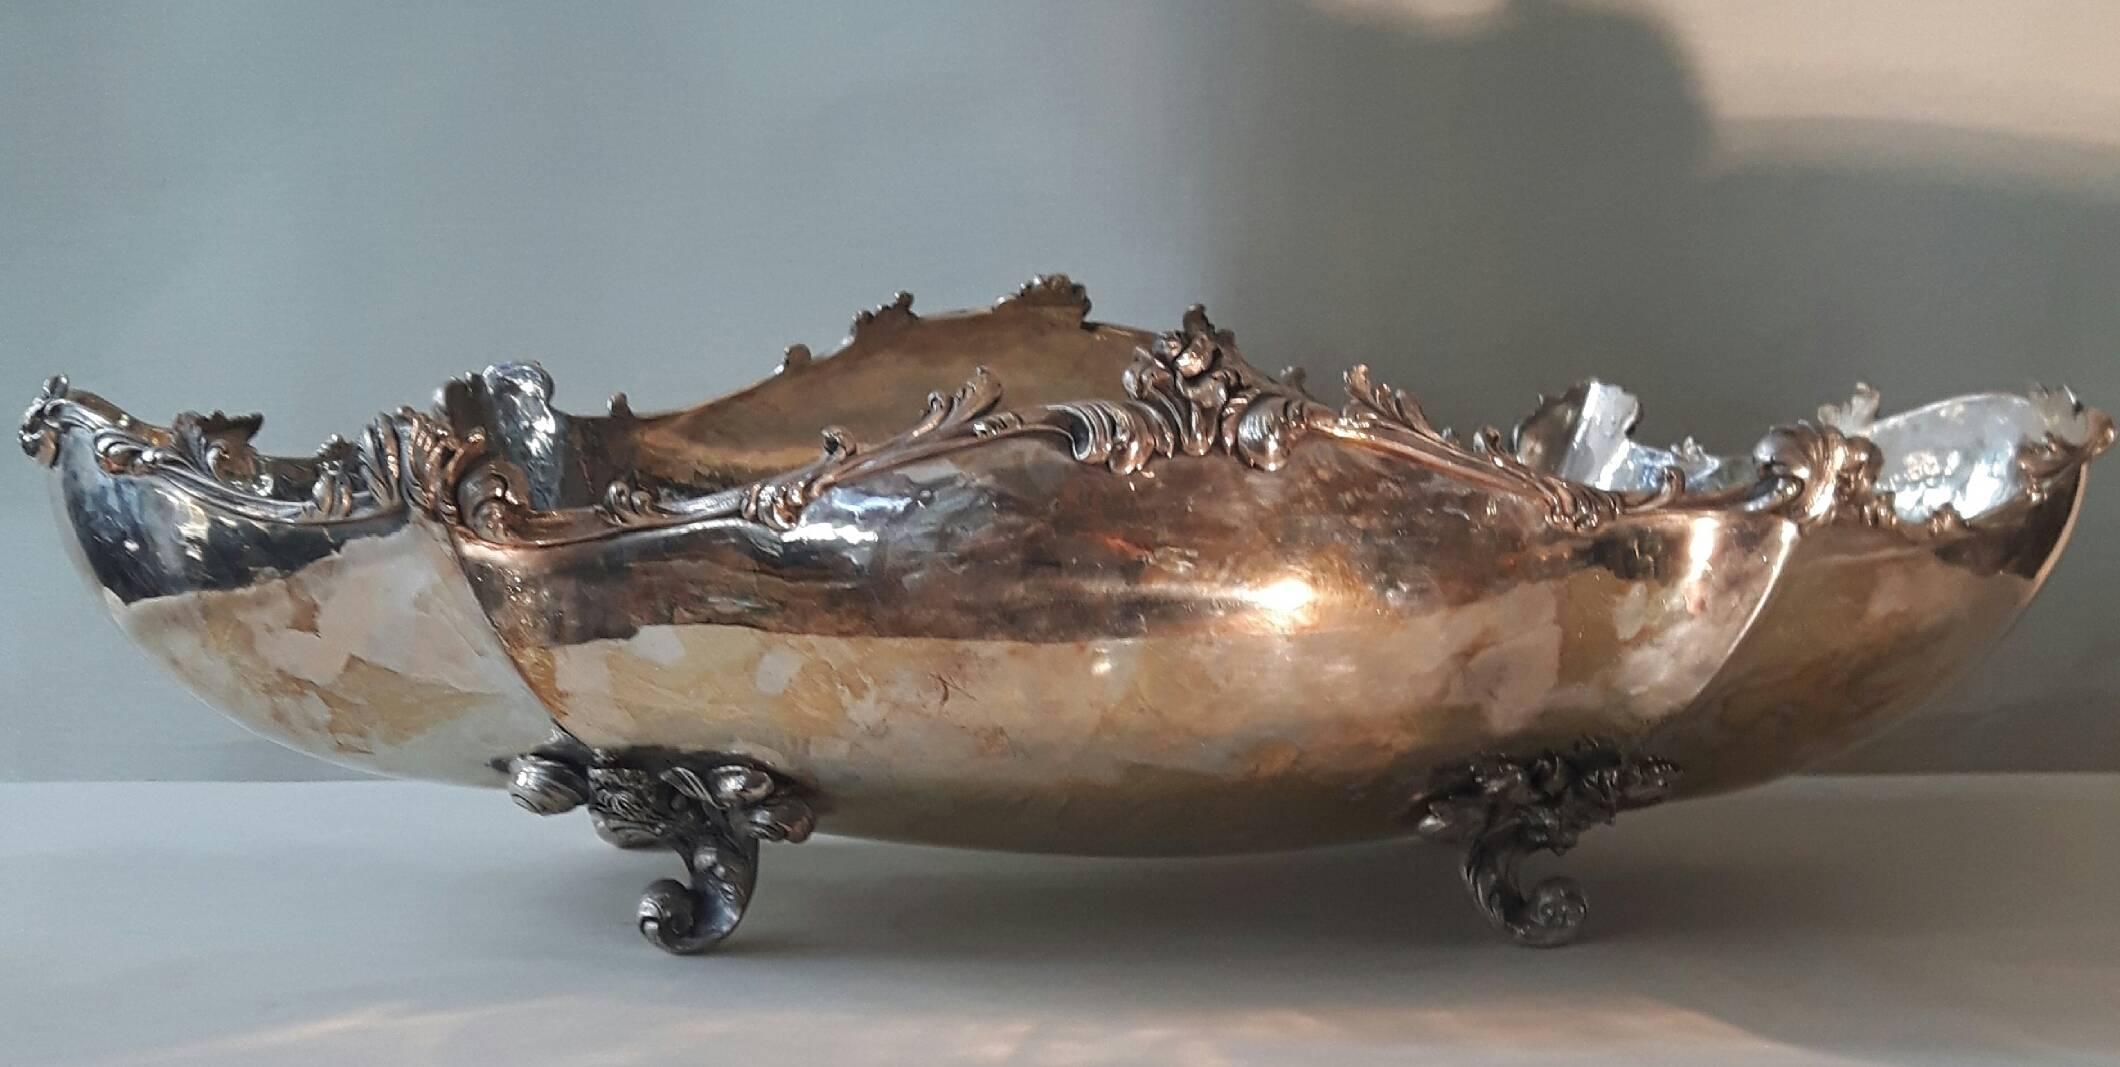 A large scalloped edged silver plated bowl of the Victorian era, the simple body elegantly highlighted by a swagged rim and encrusted flowers, the whole resting on scrolled fee.